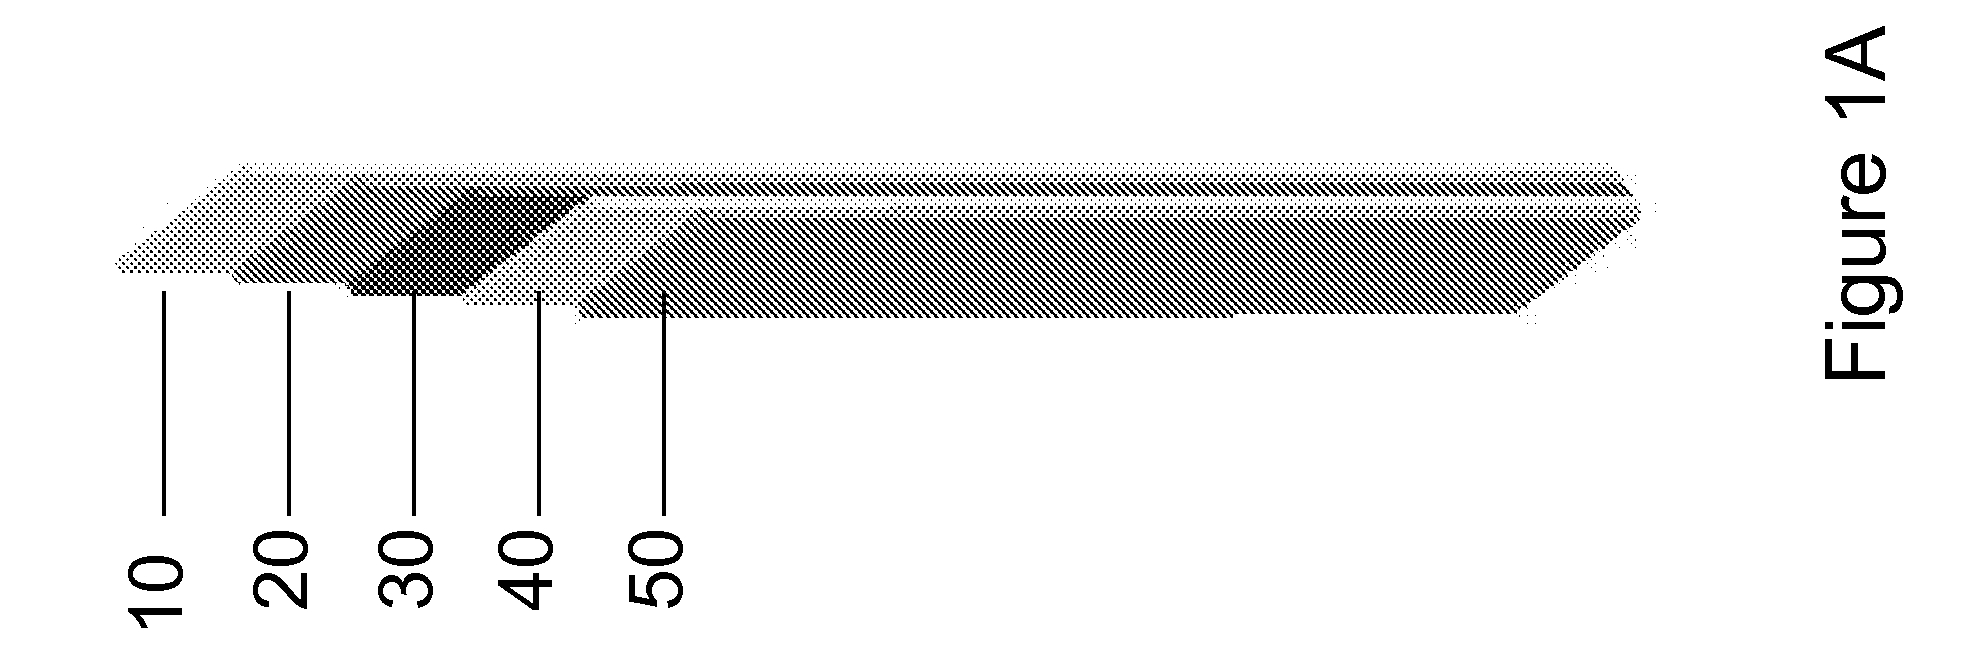 Apparatus for transforming the aspect ratio of an optical input field based on stacked waveguides